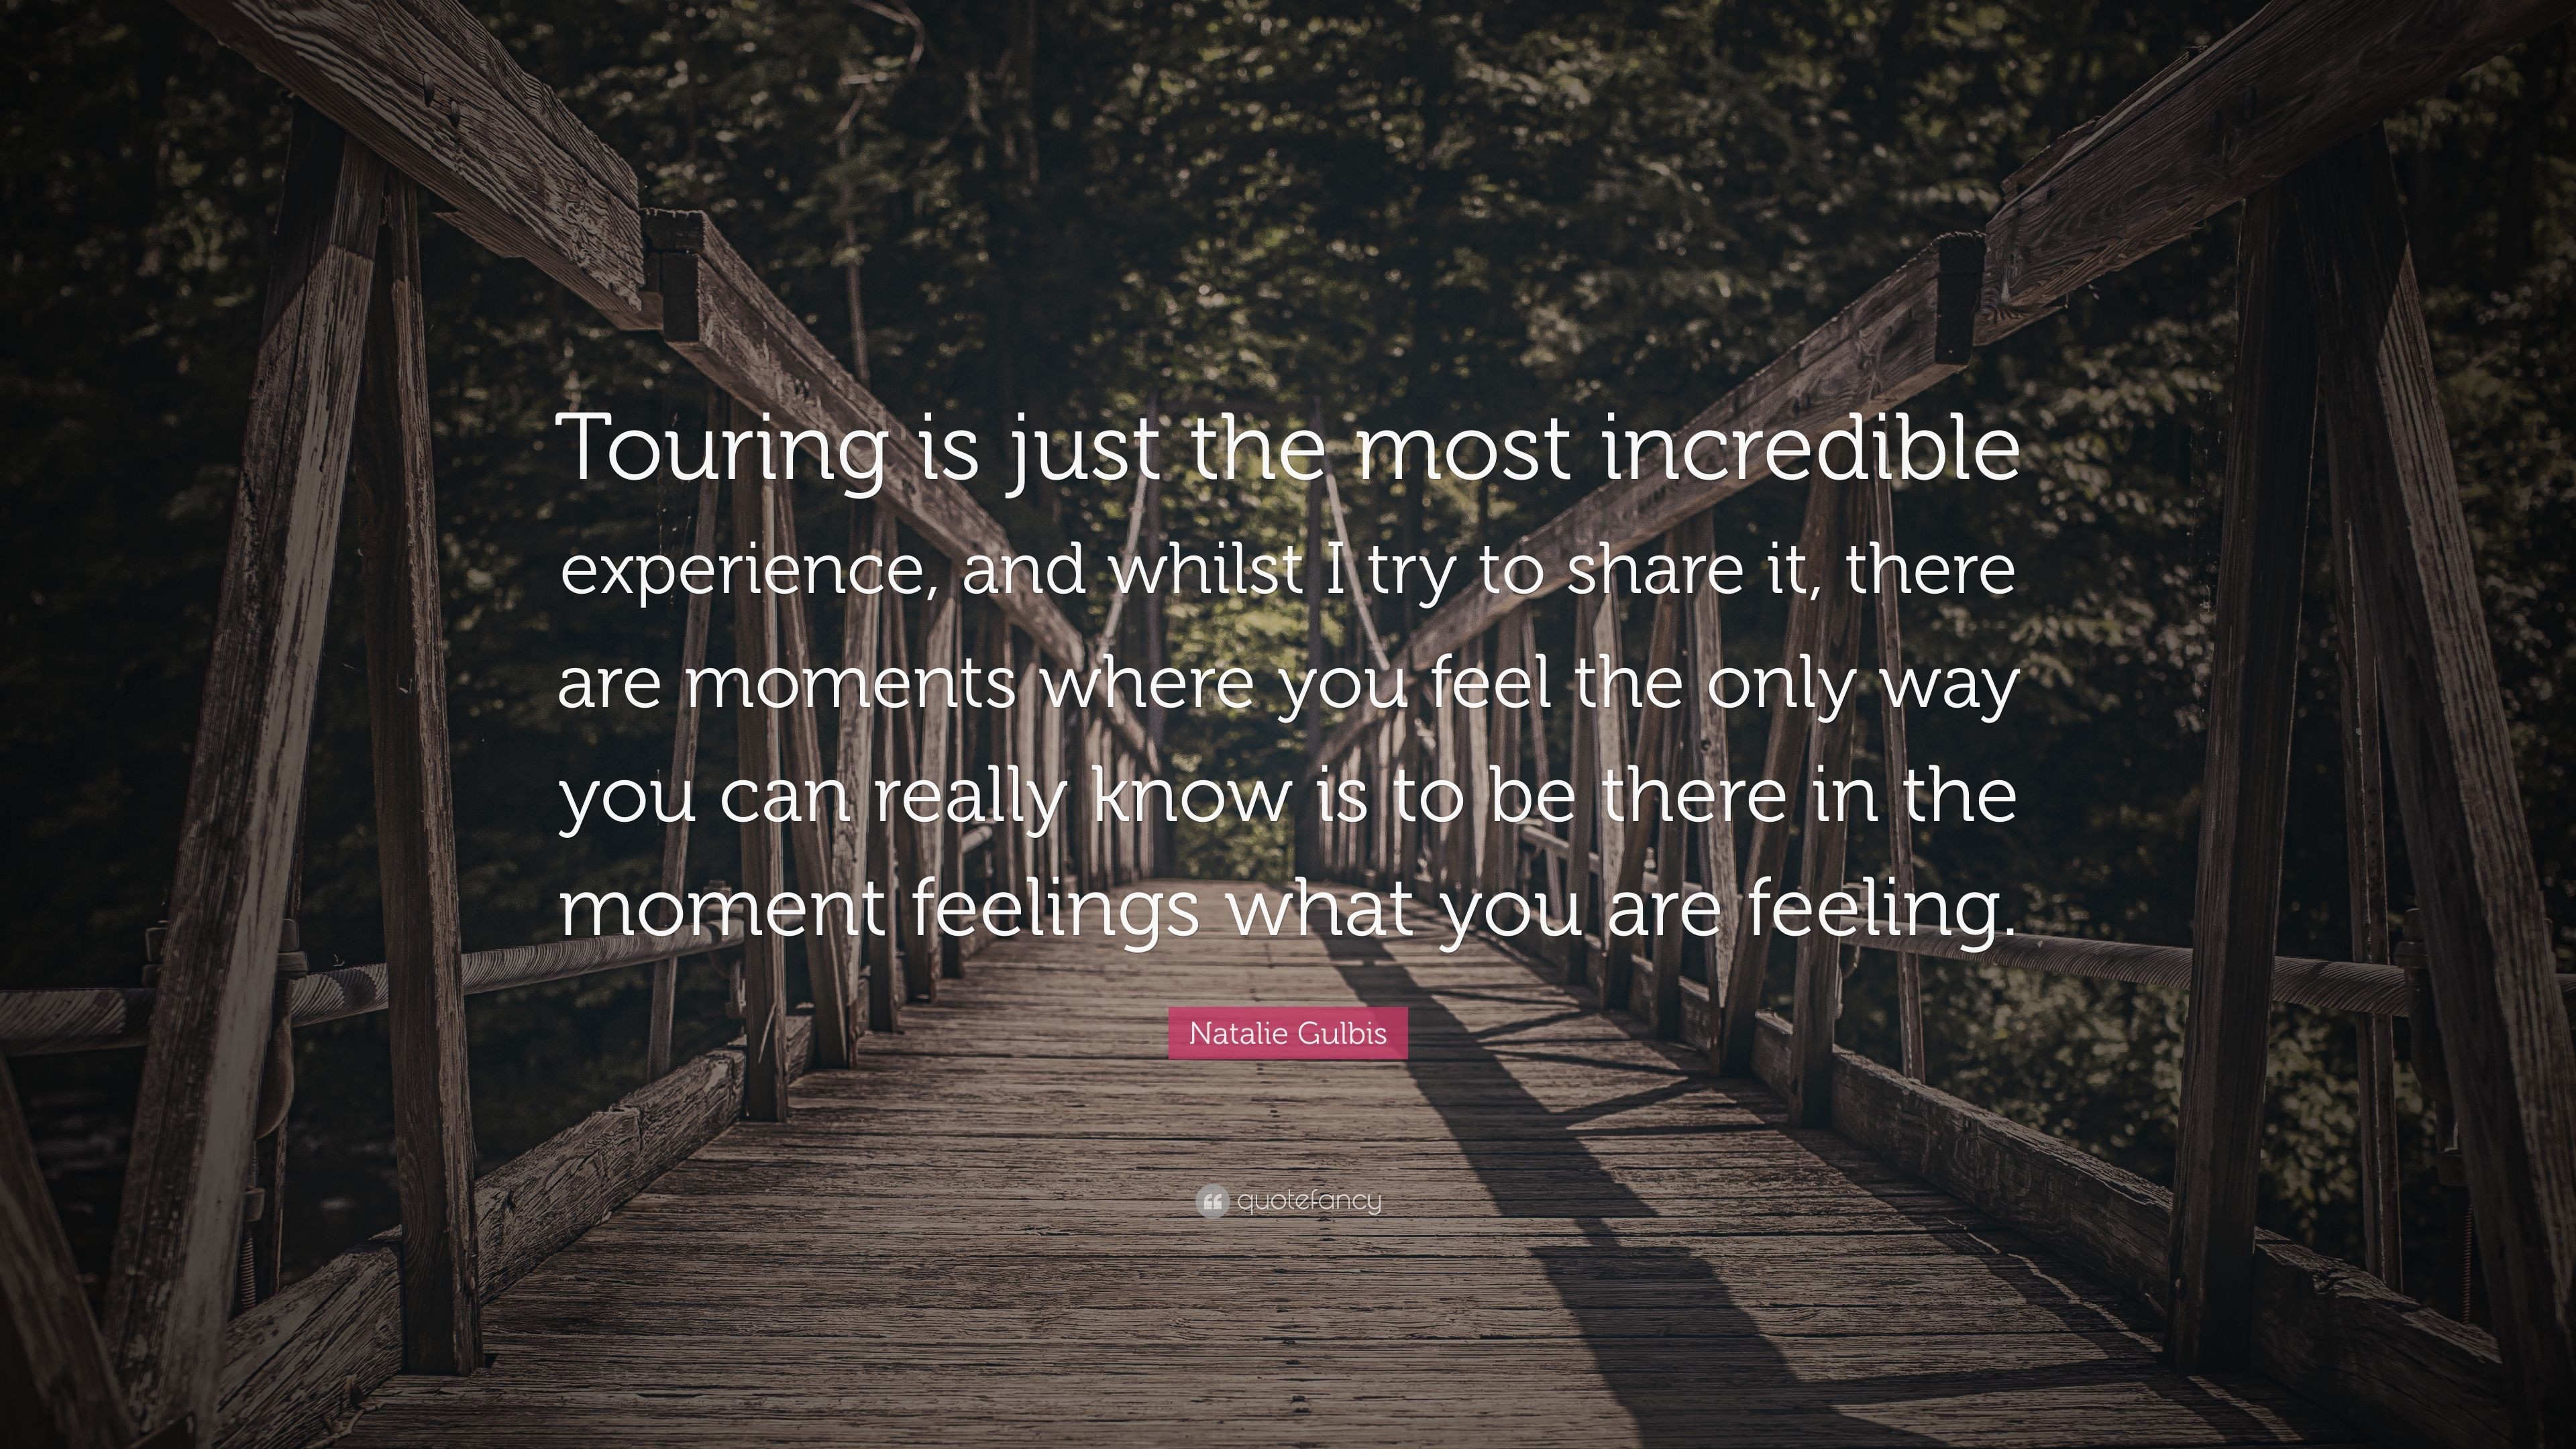 3840x2160 Natalie Gulbis Quote: “Touring is just the most incredible experience, and  whilst I